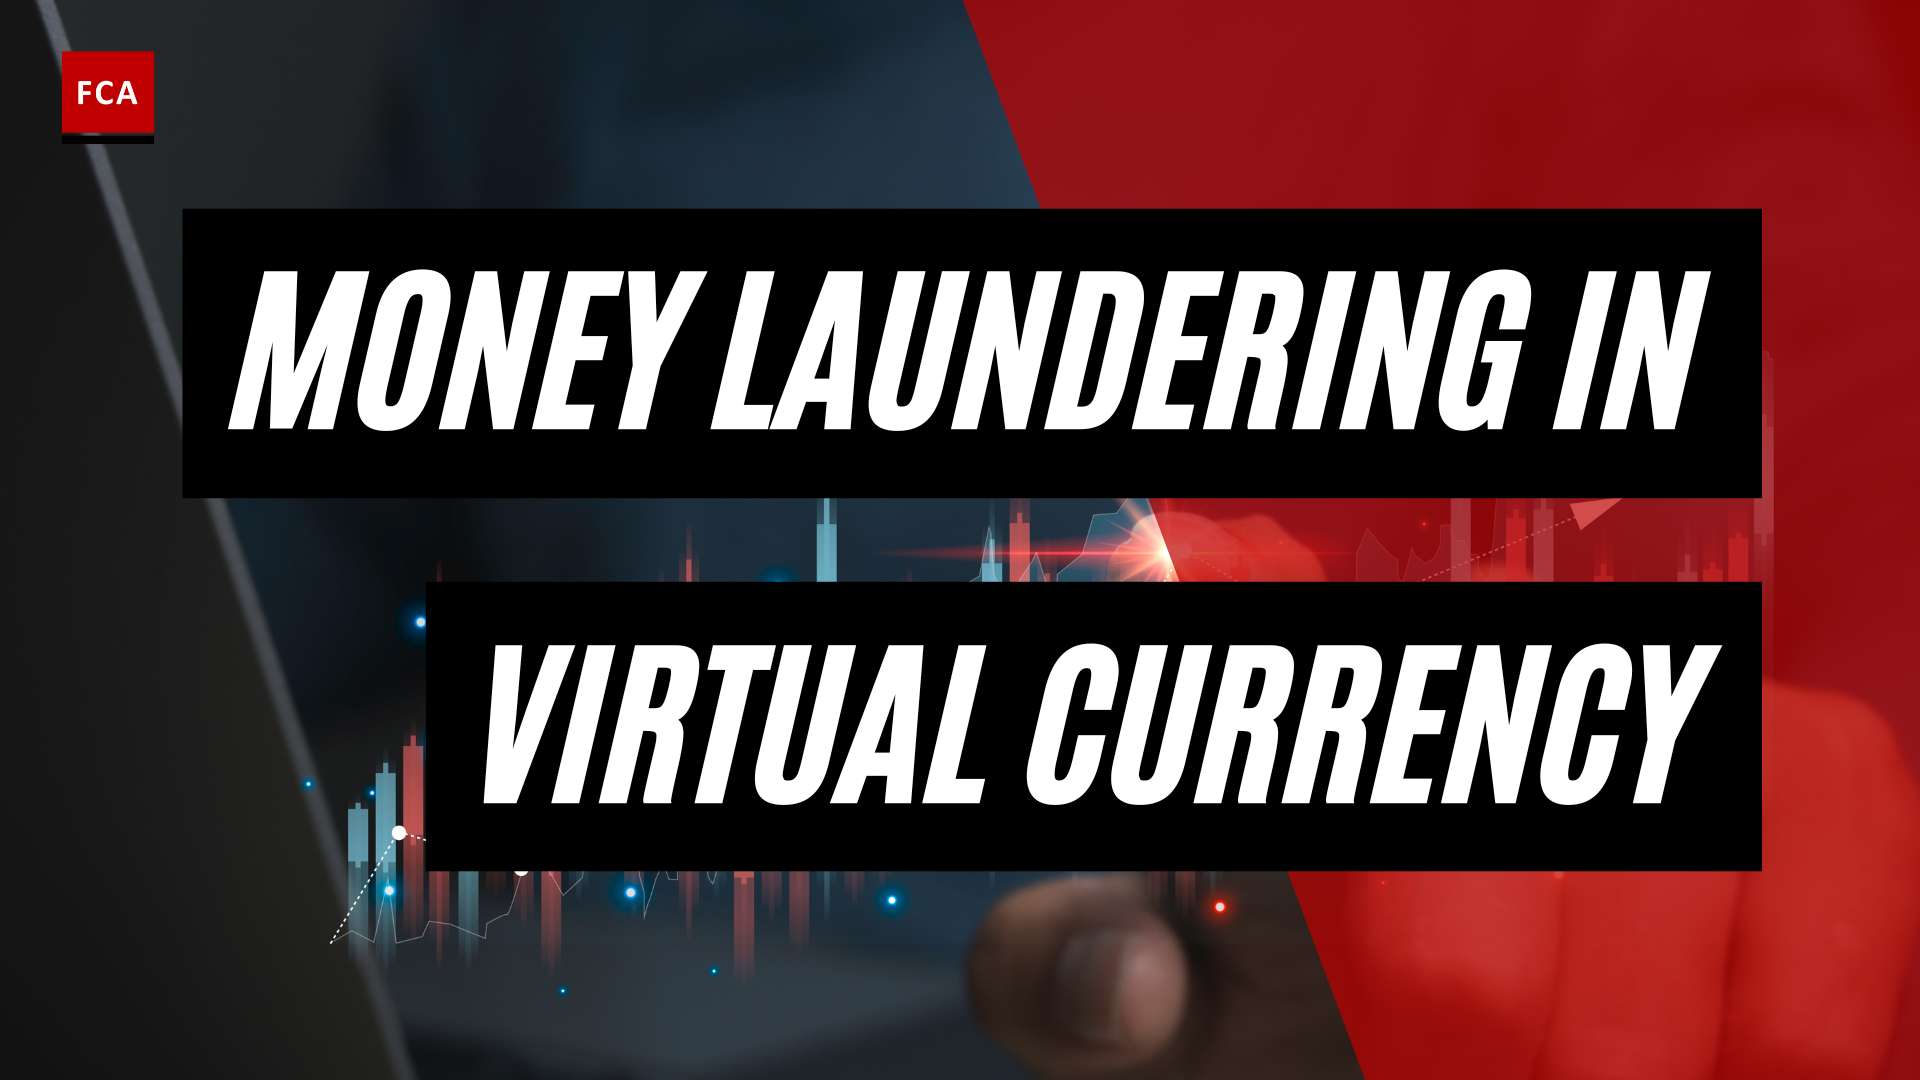 Virtual Currency, Real Consequences: The Dark Side Of Money Laundering